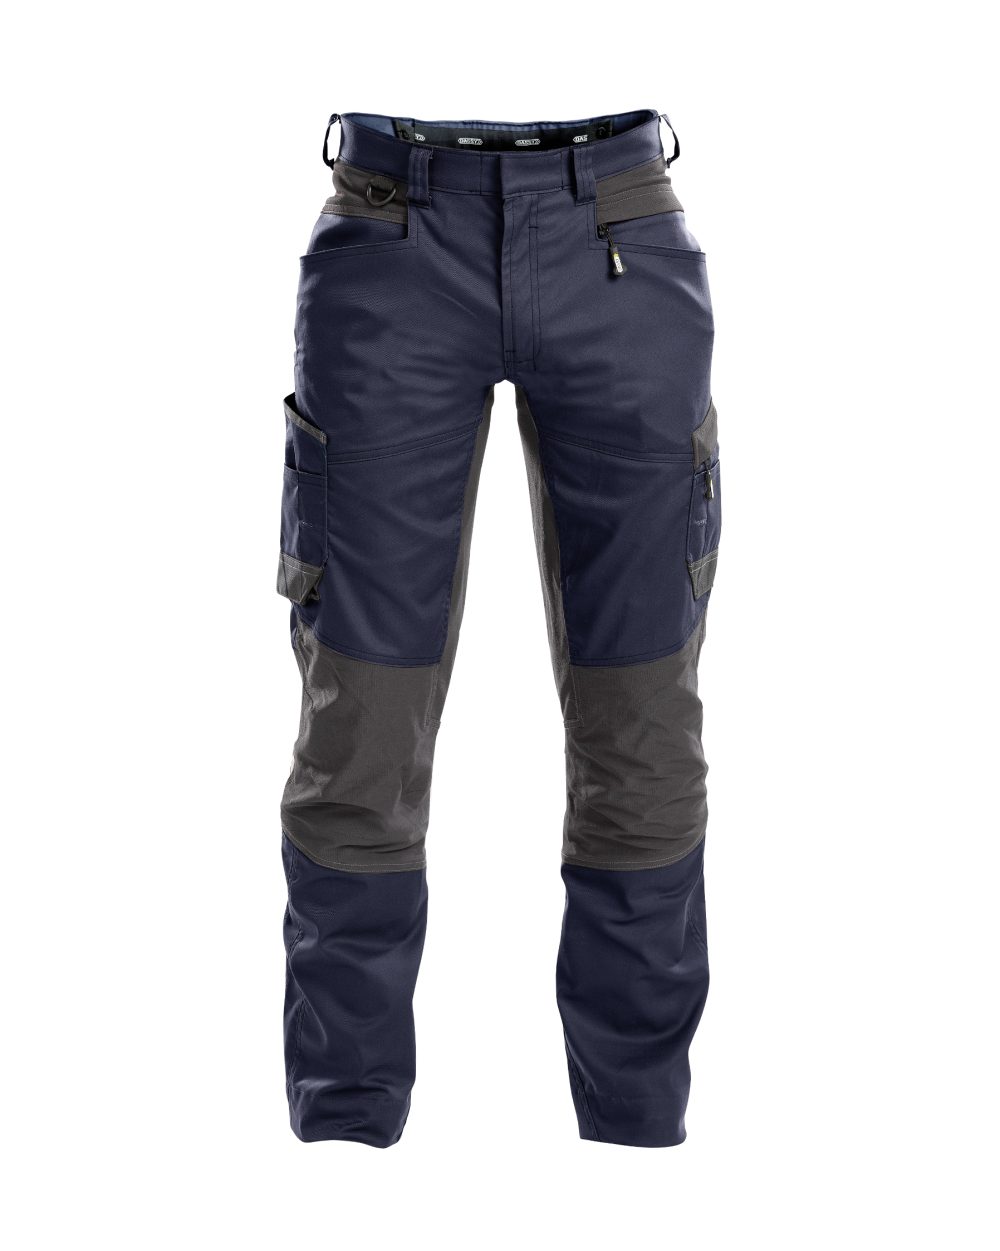 Dassy Helix Work Trousers